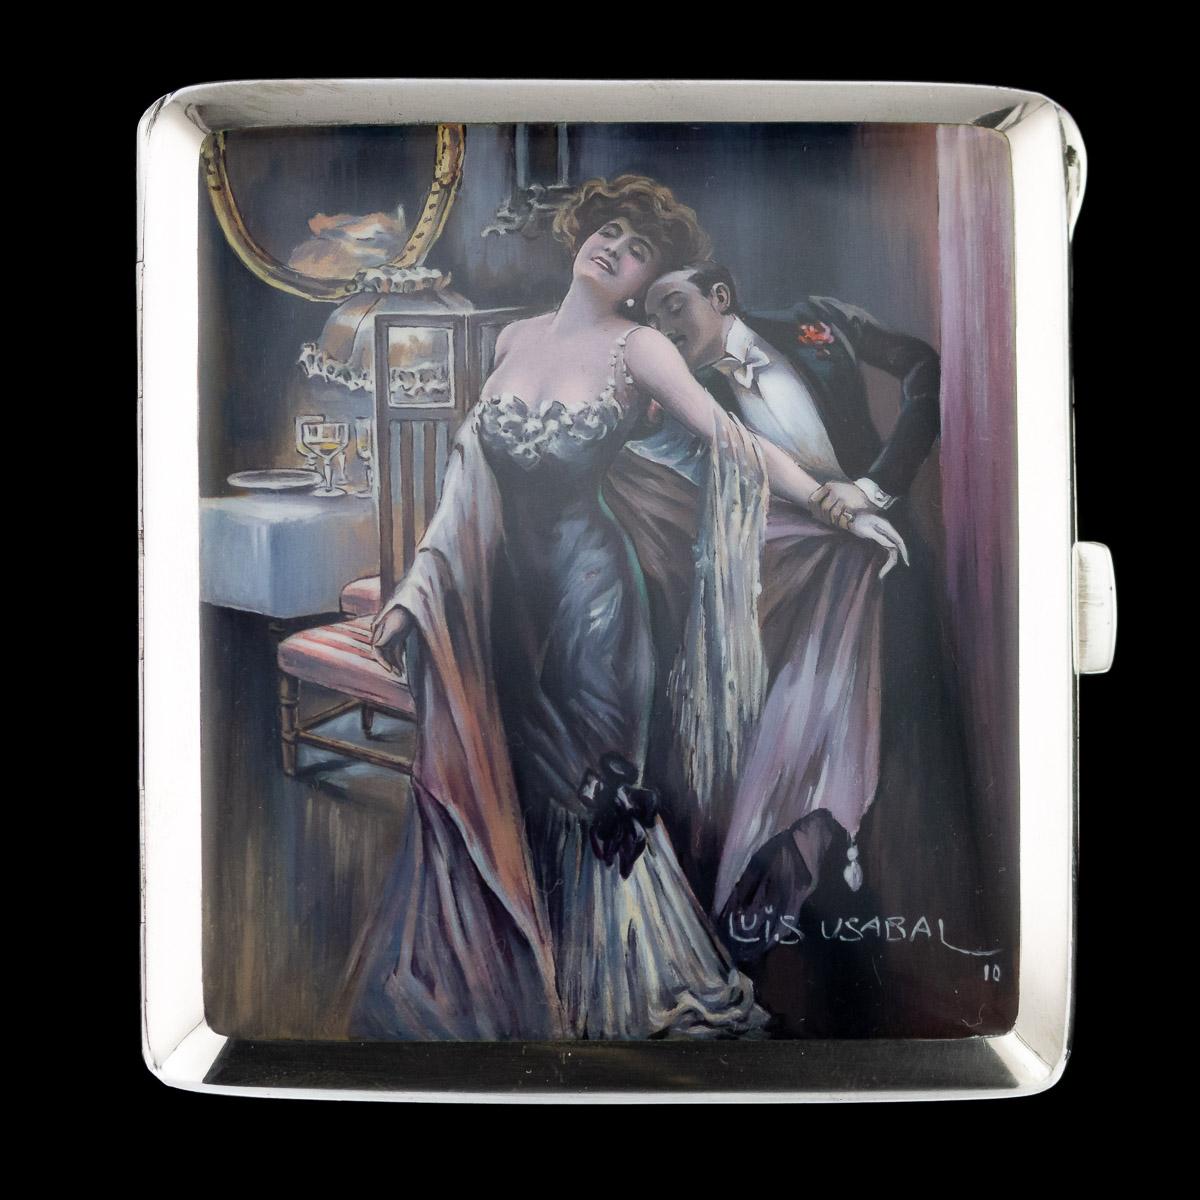 Antique early 20th century German solid silver and enamel cigarette case, the enamelled cover is beautifully hand painted and signed by the famous artist Don Luis Usabal, renowned for celebrities portraits, his watercolors were printed in many